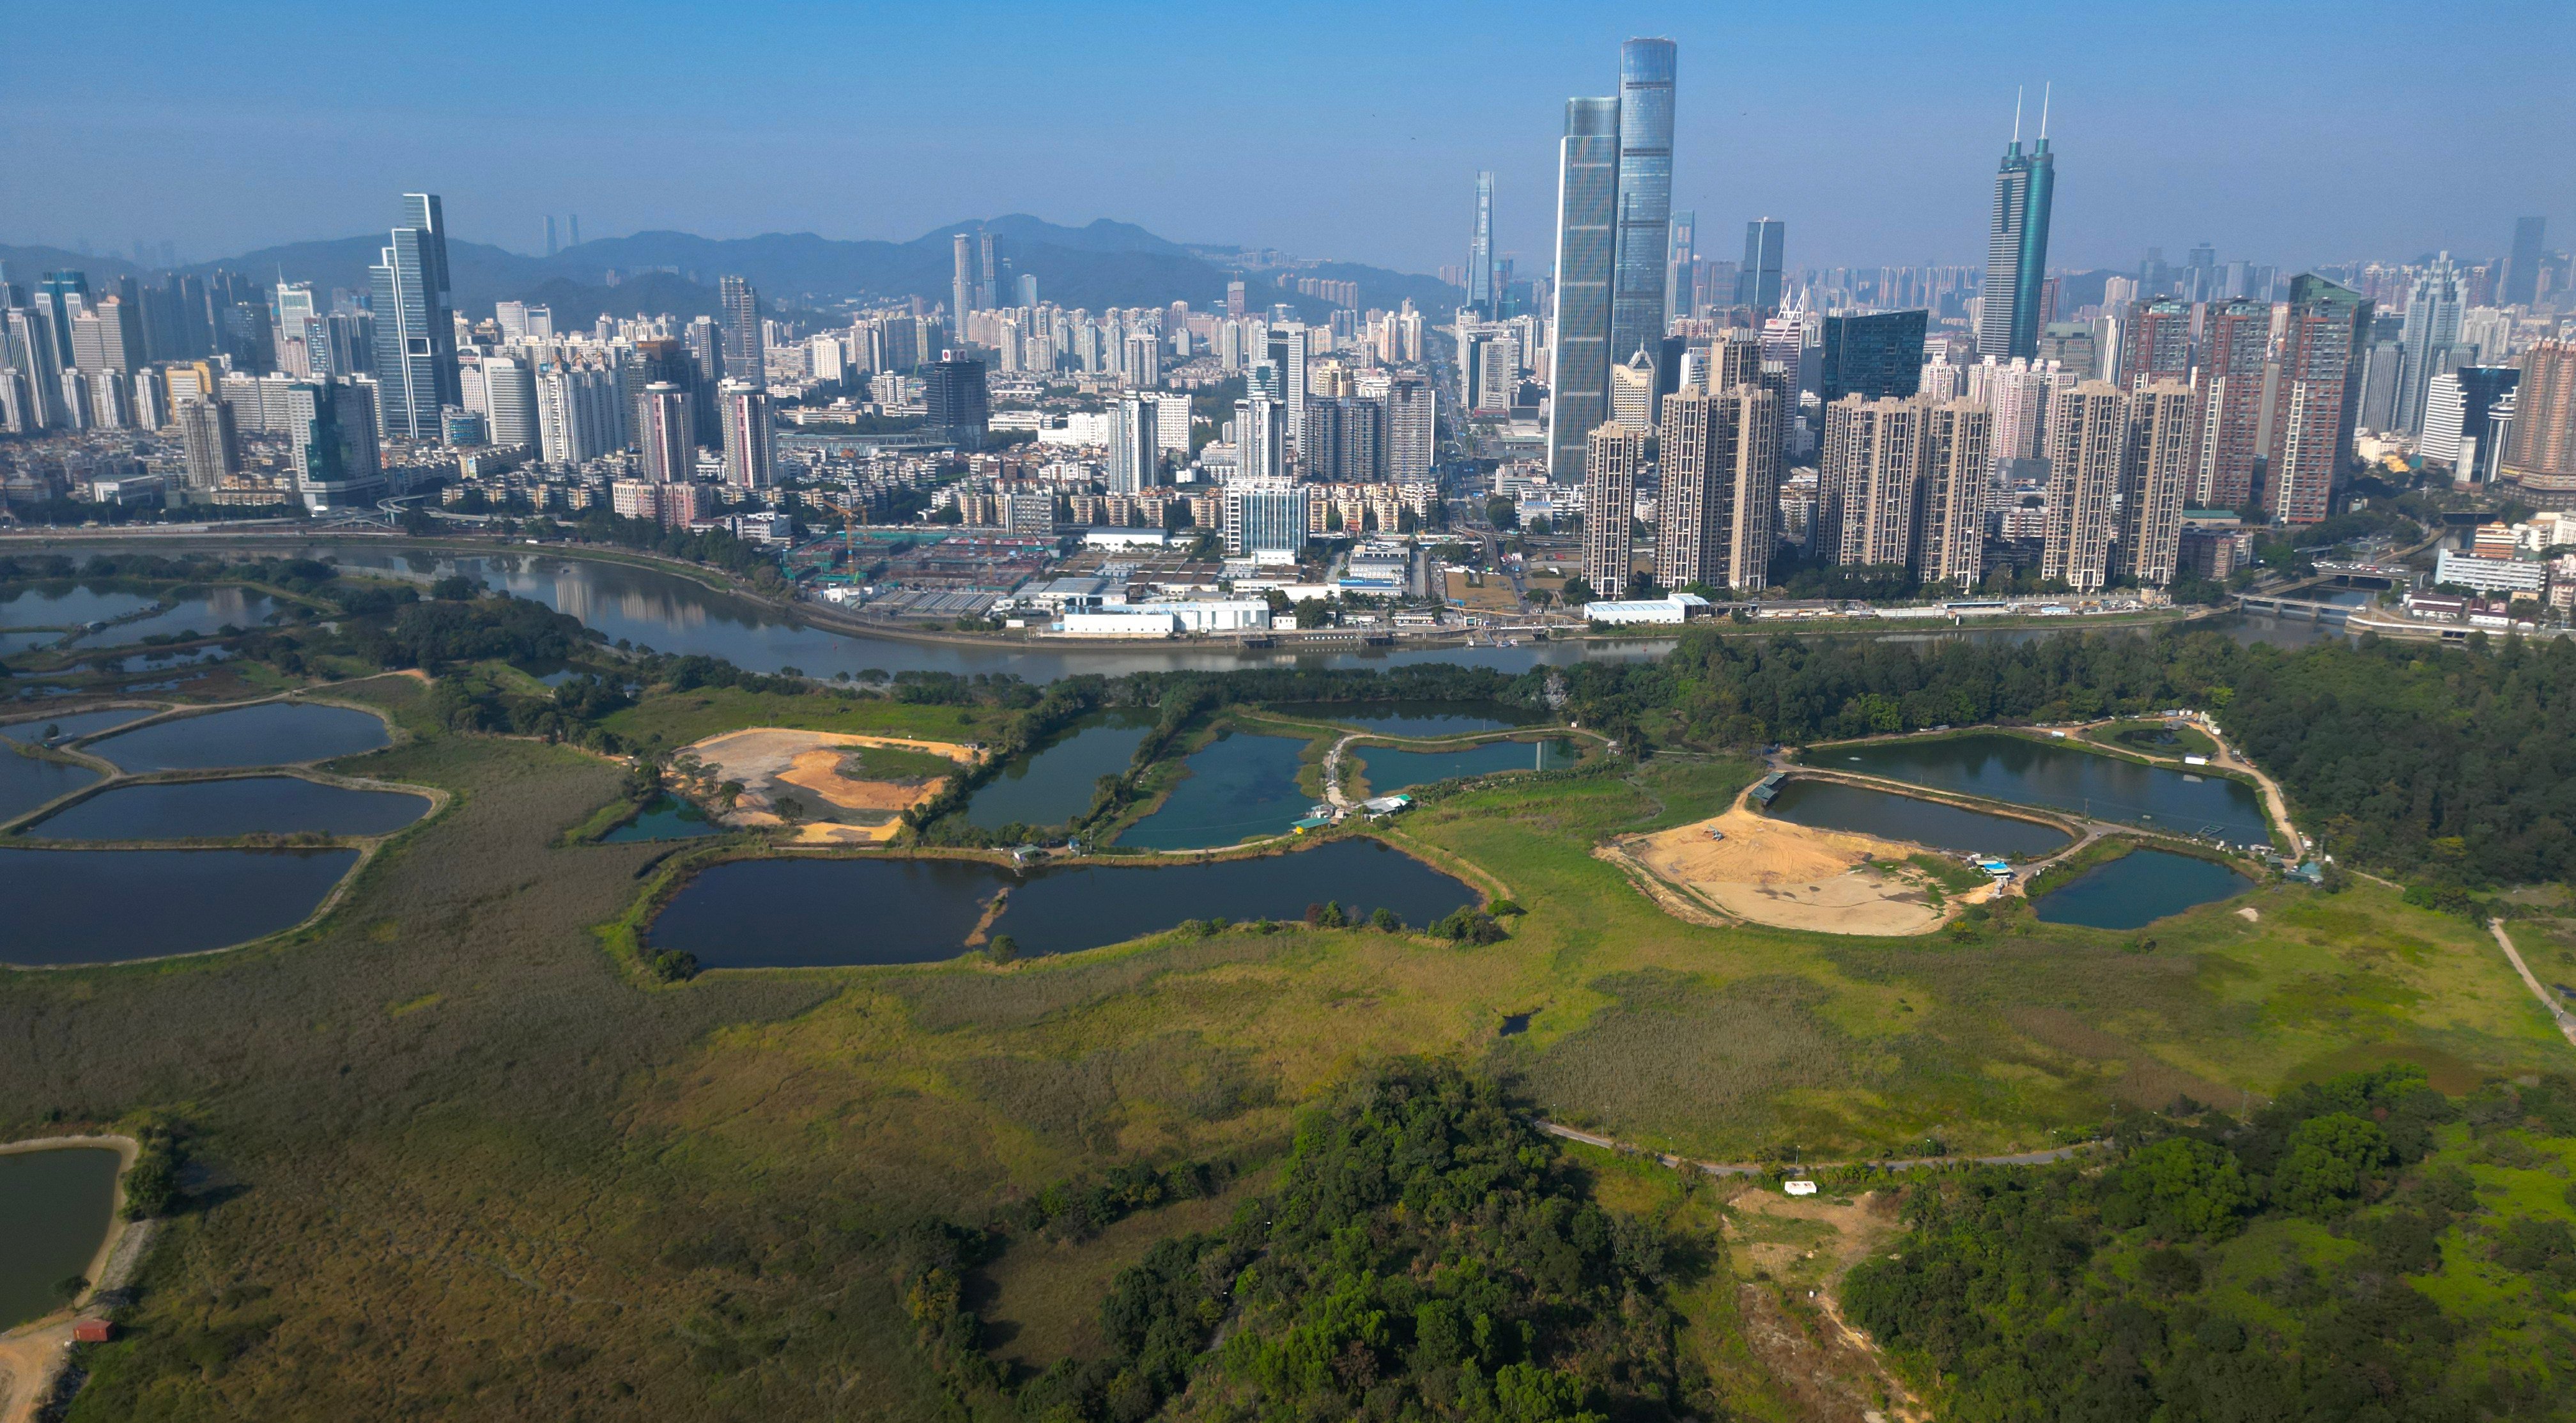 The Shenzhen area bordering Hong Kong. The government plans to establish a new university town in the area. Photo: May Tse